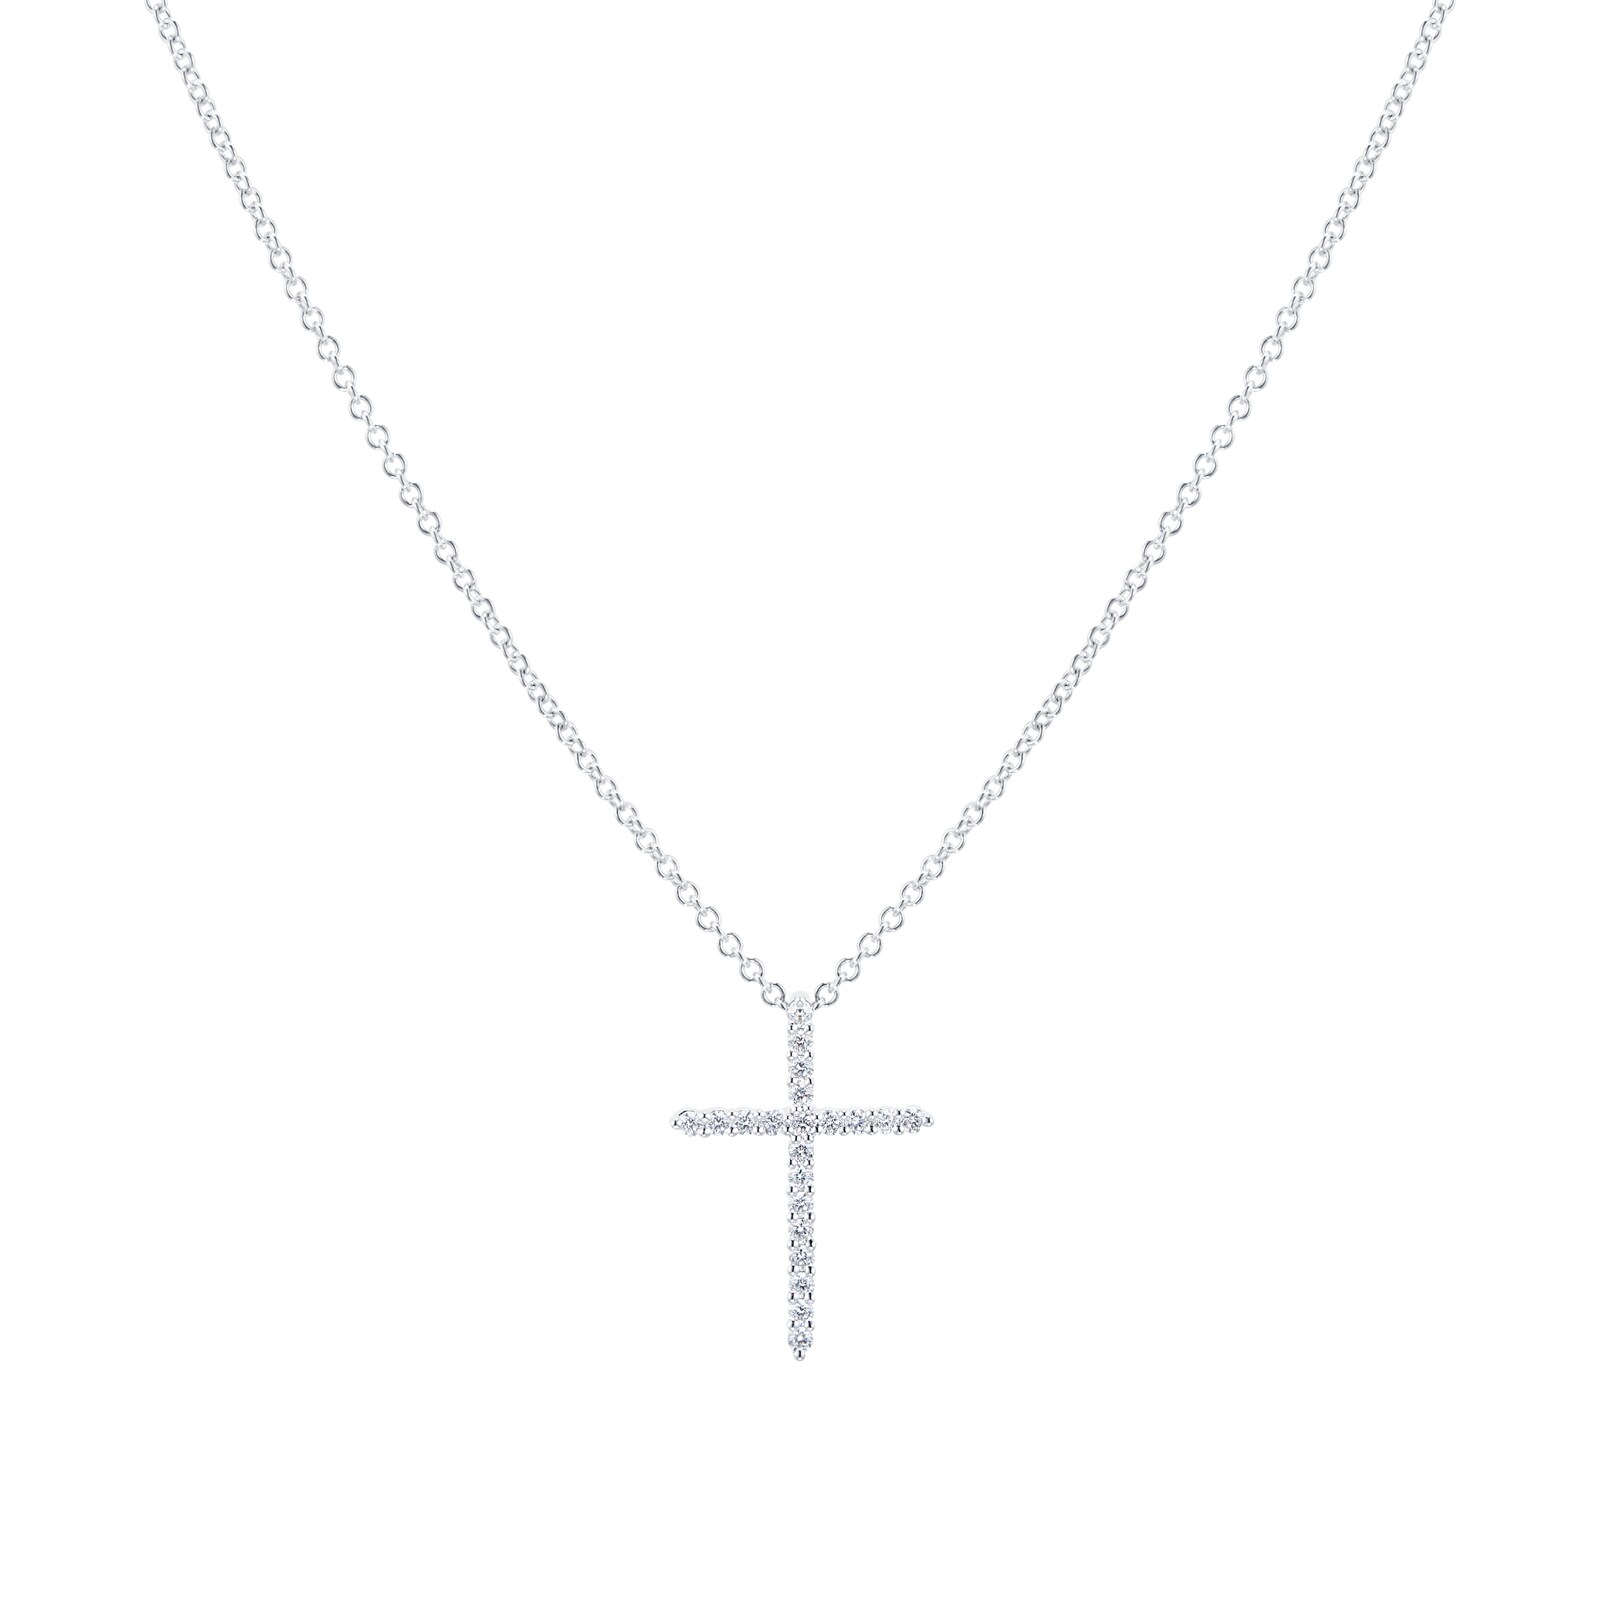 18k solid white gold chain necklace & cross pendant  #3920  h3jewels 5.00 gram 